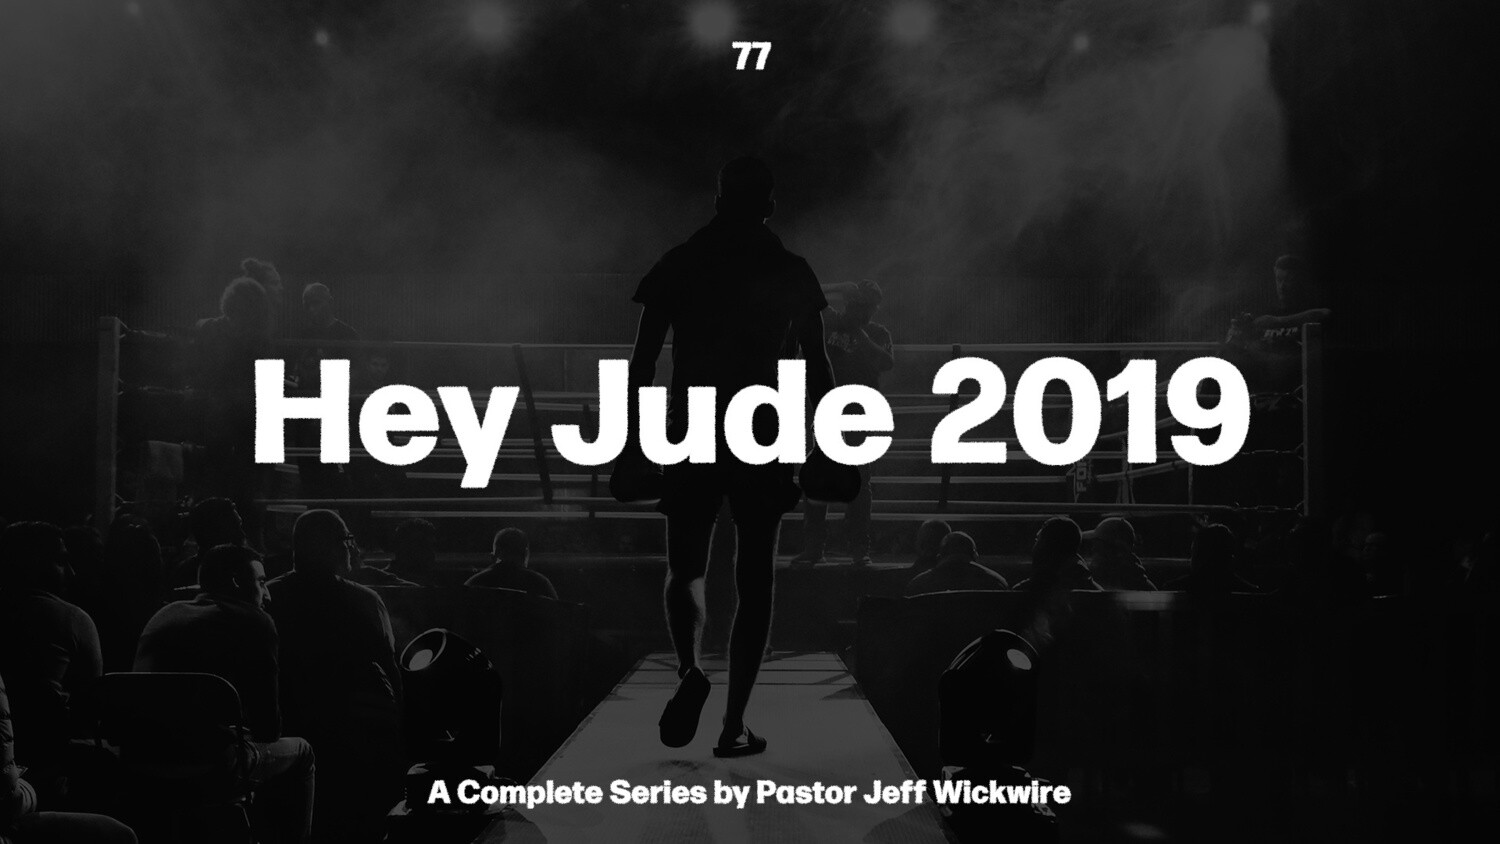 77 - Hey Jude 2019 - Complete Series By Pastor Jeff Wickwire